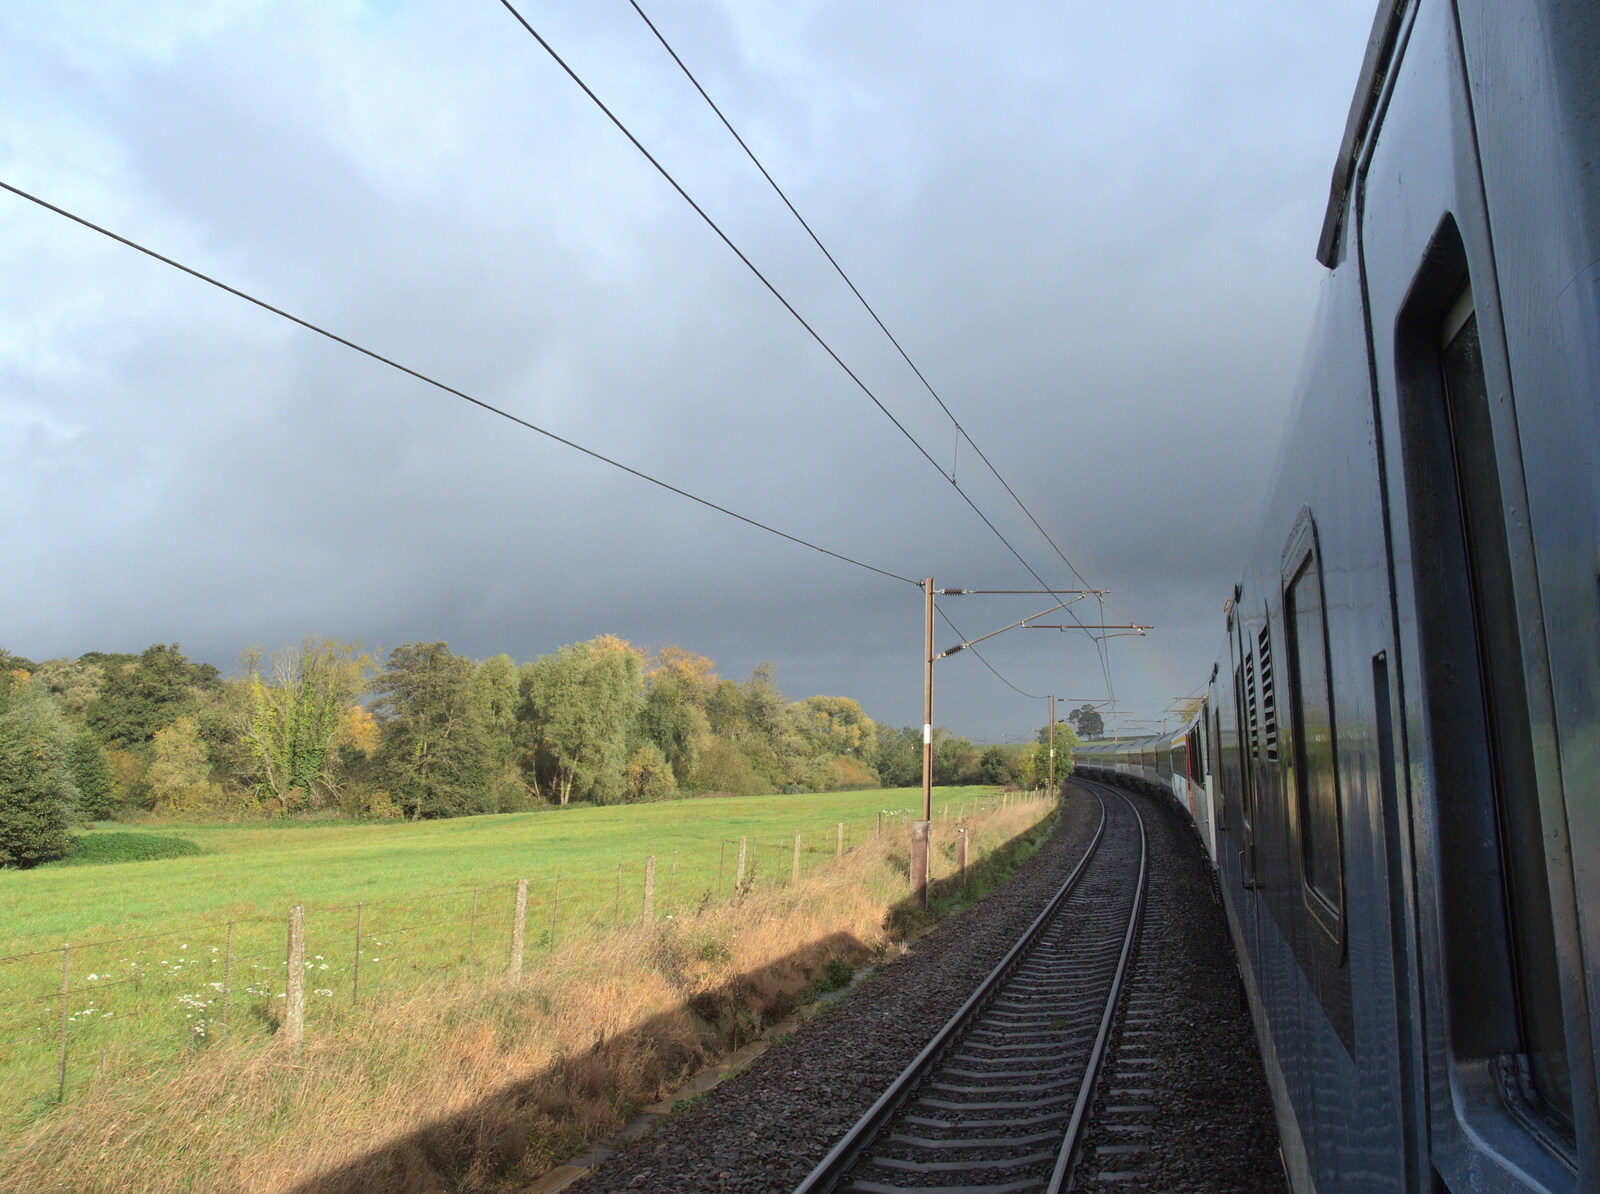 There's a rainbow on the train from (Very) Long Train (Not) Running, Stowmarket, Suffolk - 21st October 2014